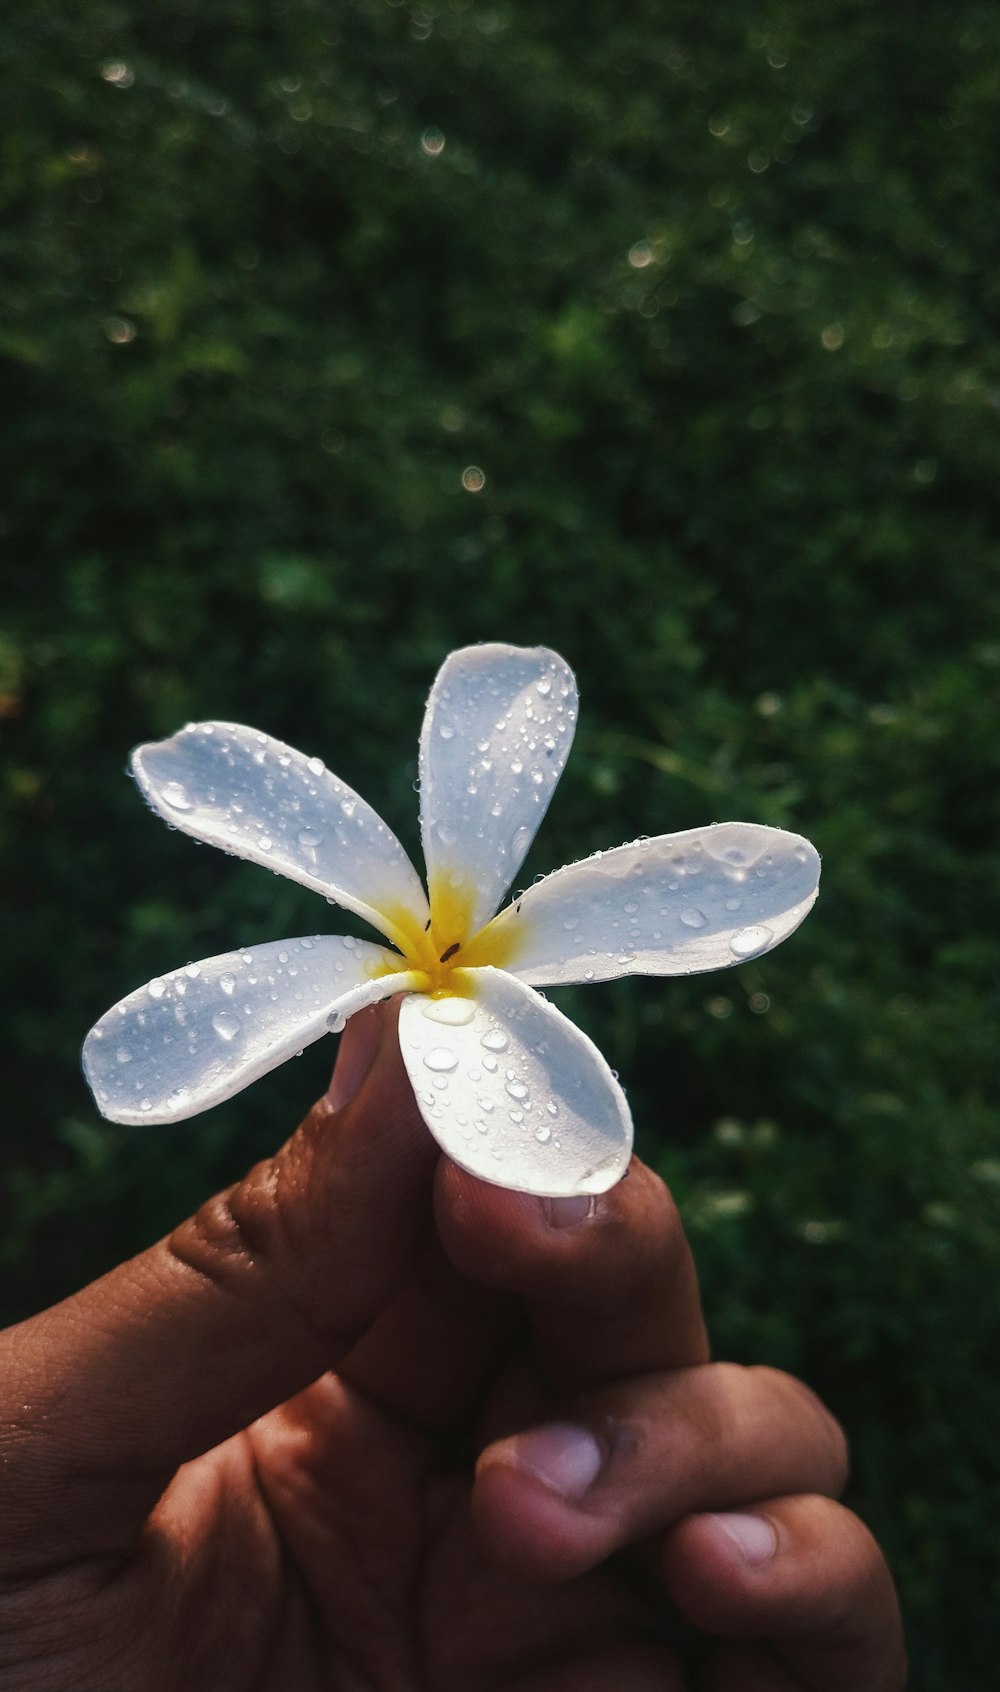 a hand holding a white flower with a yellow center